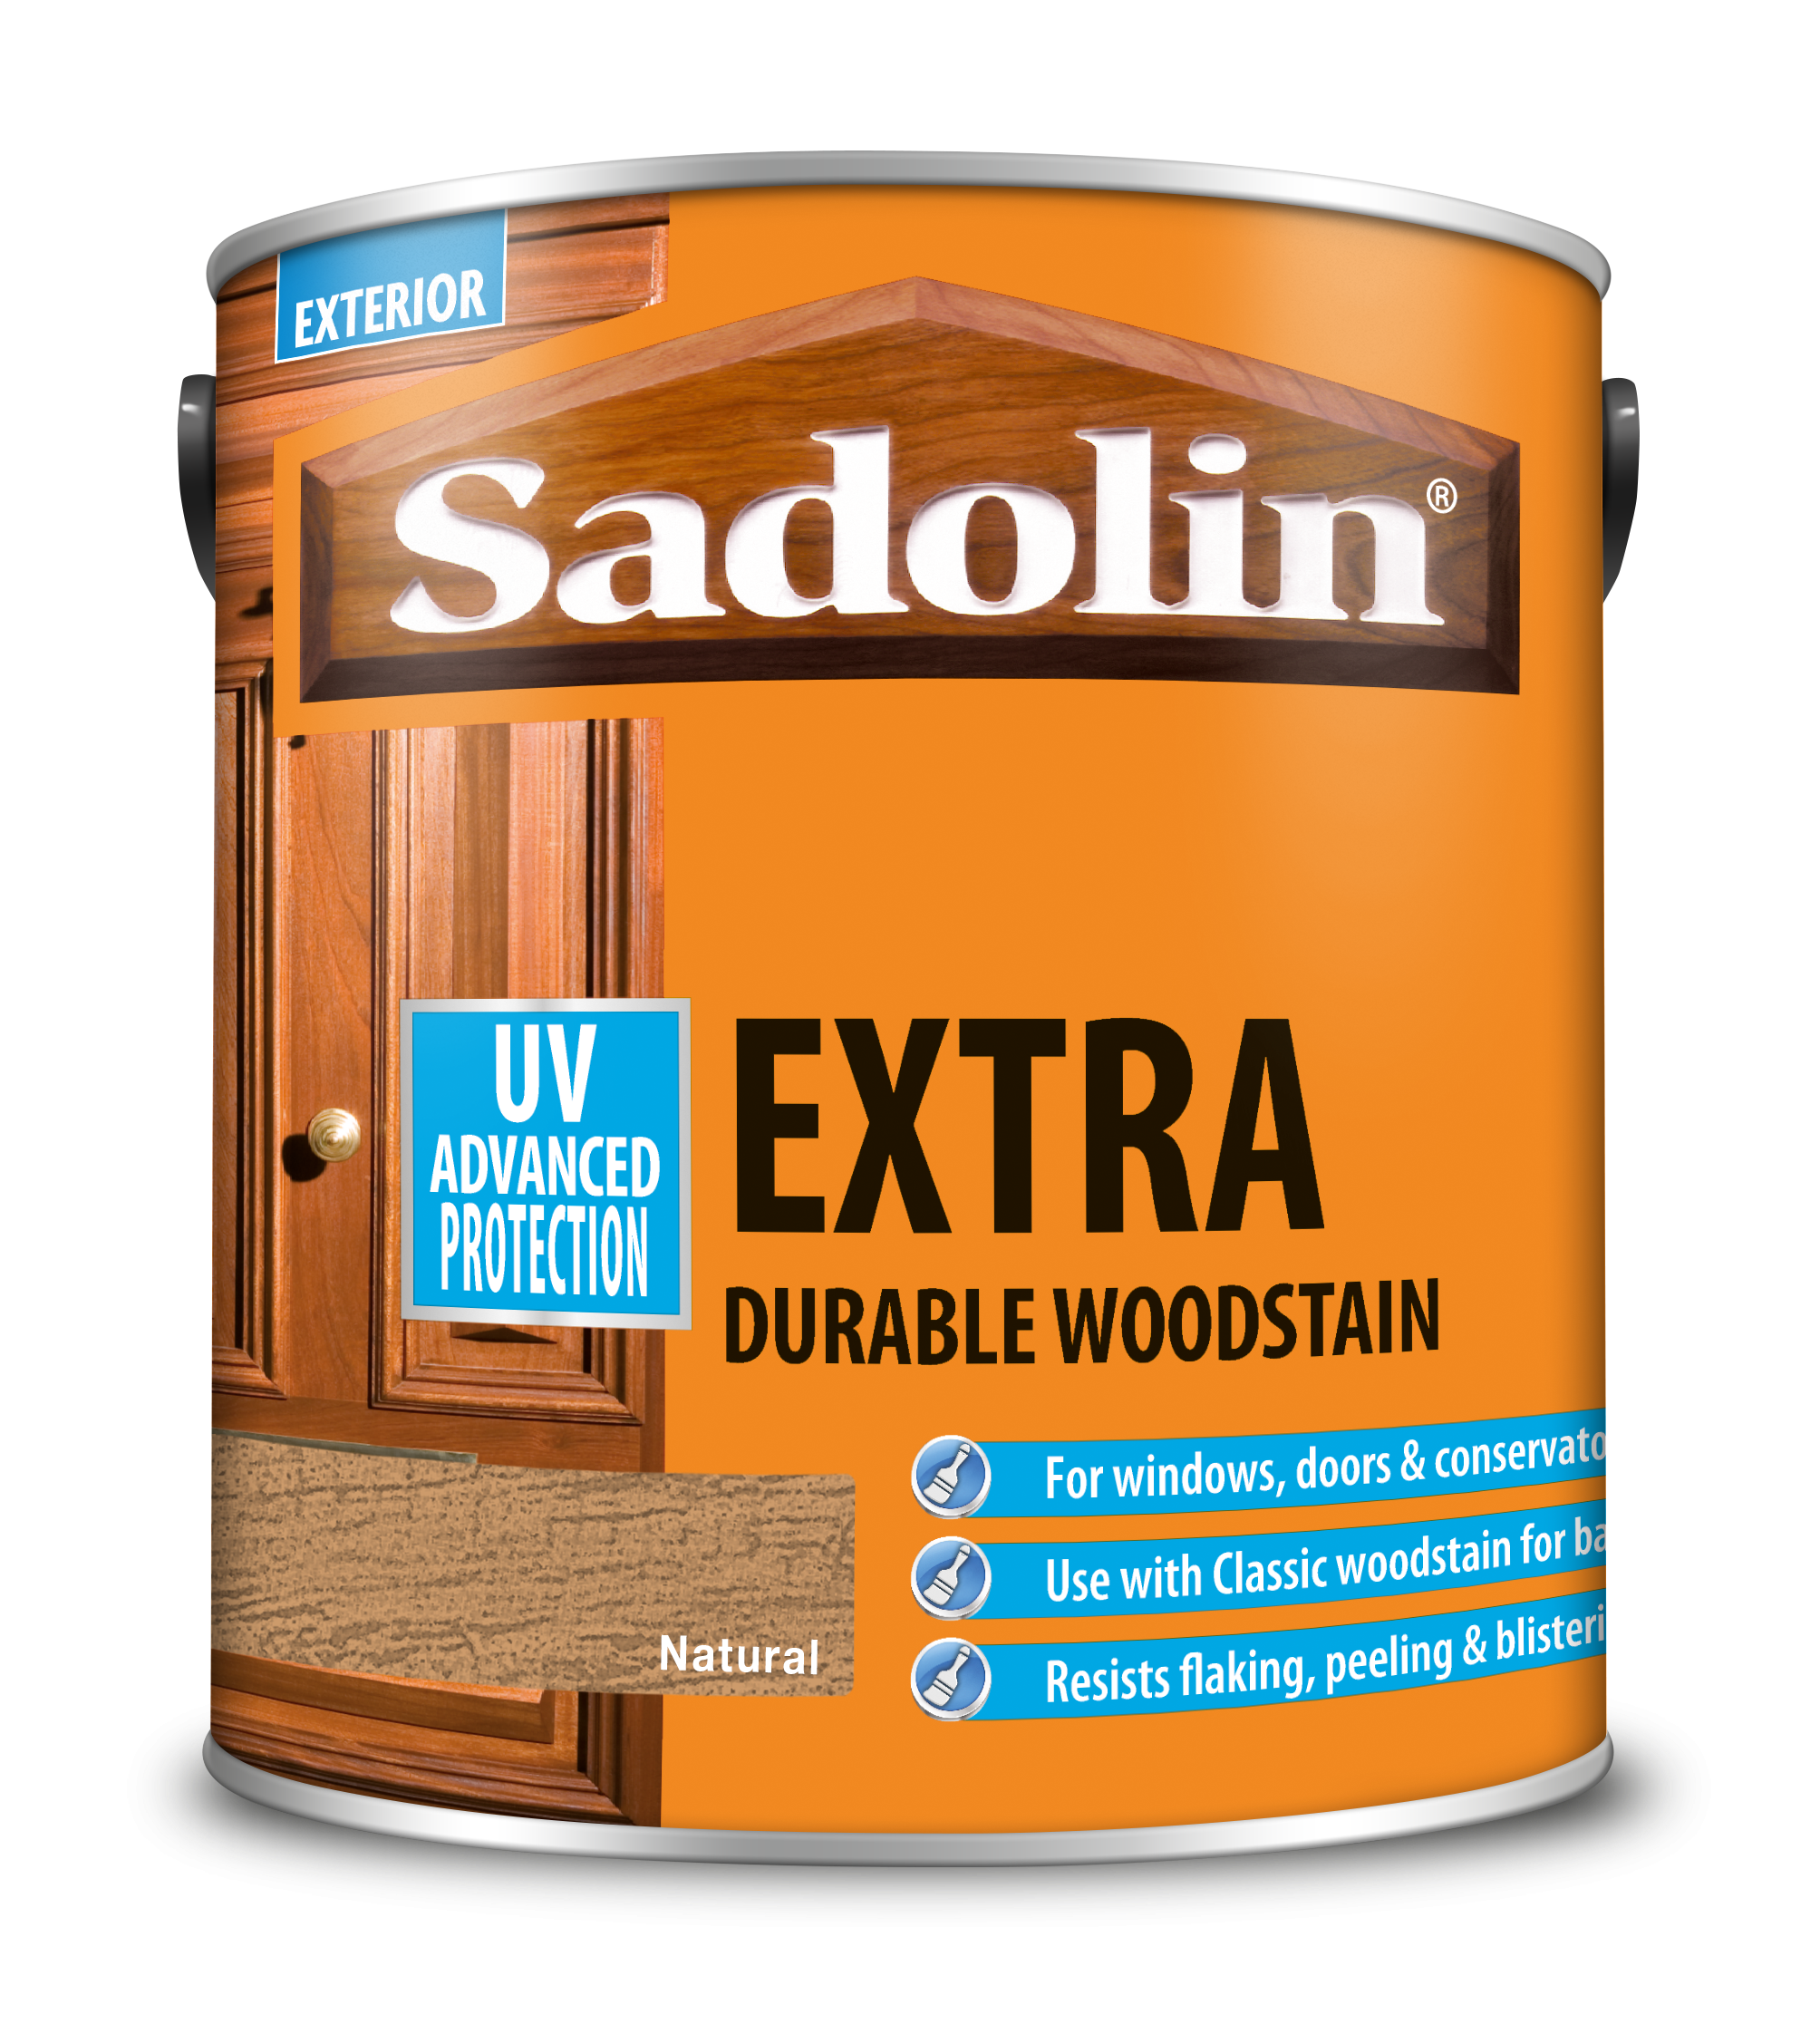 Sadolin Extra Durable Woodstain Natural 2.5L [MPPSSVL]  5028579